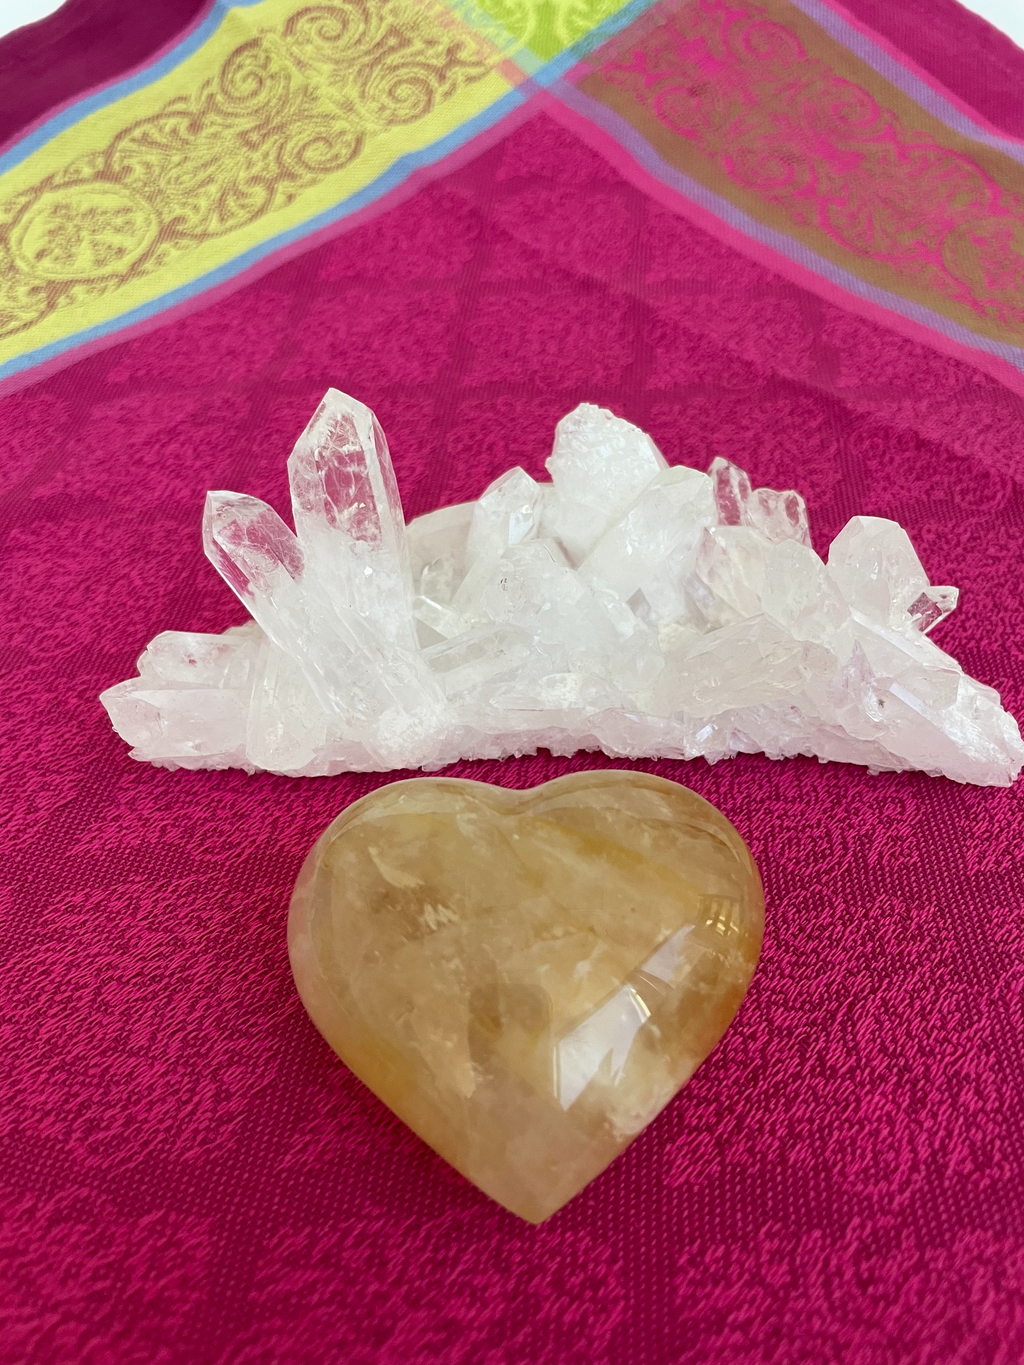 Beautiful citrine (yellow quartz) heart! Great to place on your altar or bookshelf, to hold during meditation, to use for healing or as a décor item in your home of office. Citrine absorbs and dispels negative energy, is a stone of abundance - attracting money, prosperity and success, warming & energizing, enhances creativity, brings a positive attitude, is cleansing and more. This citrine heart is approximately 2" at it's widest expanse. Cost is $24.